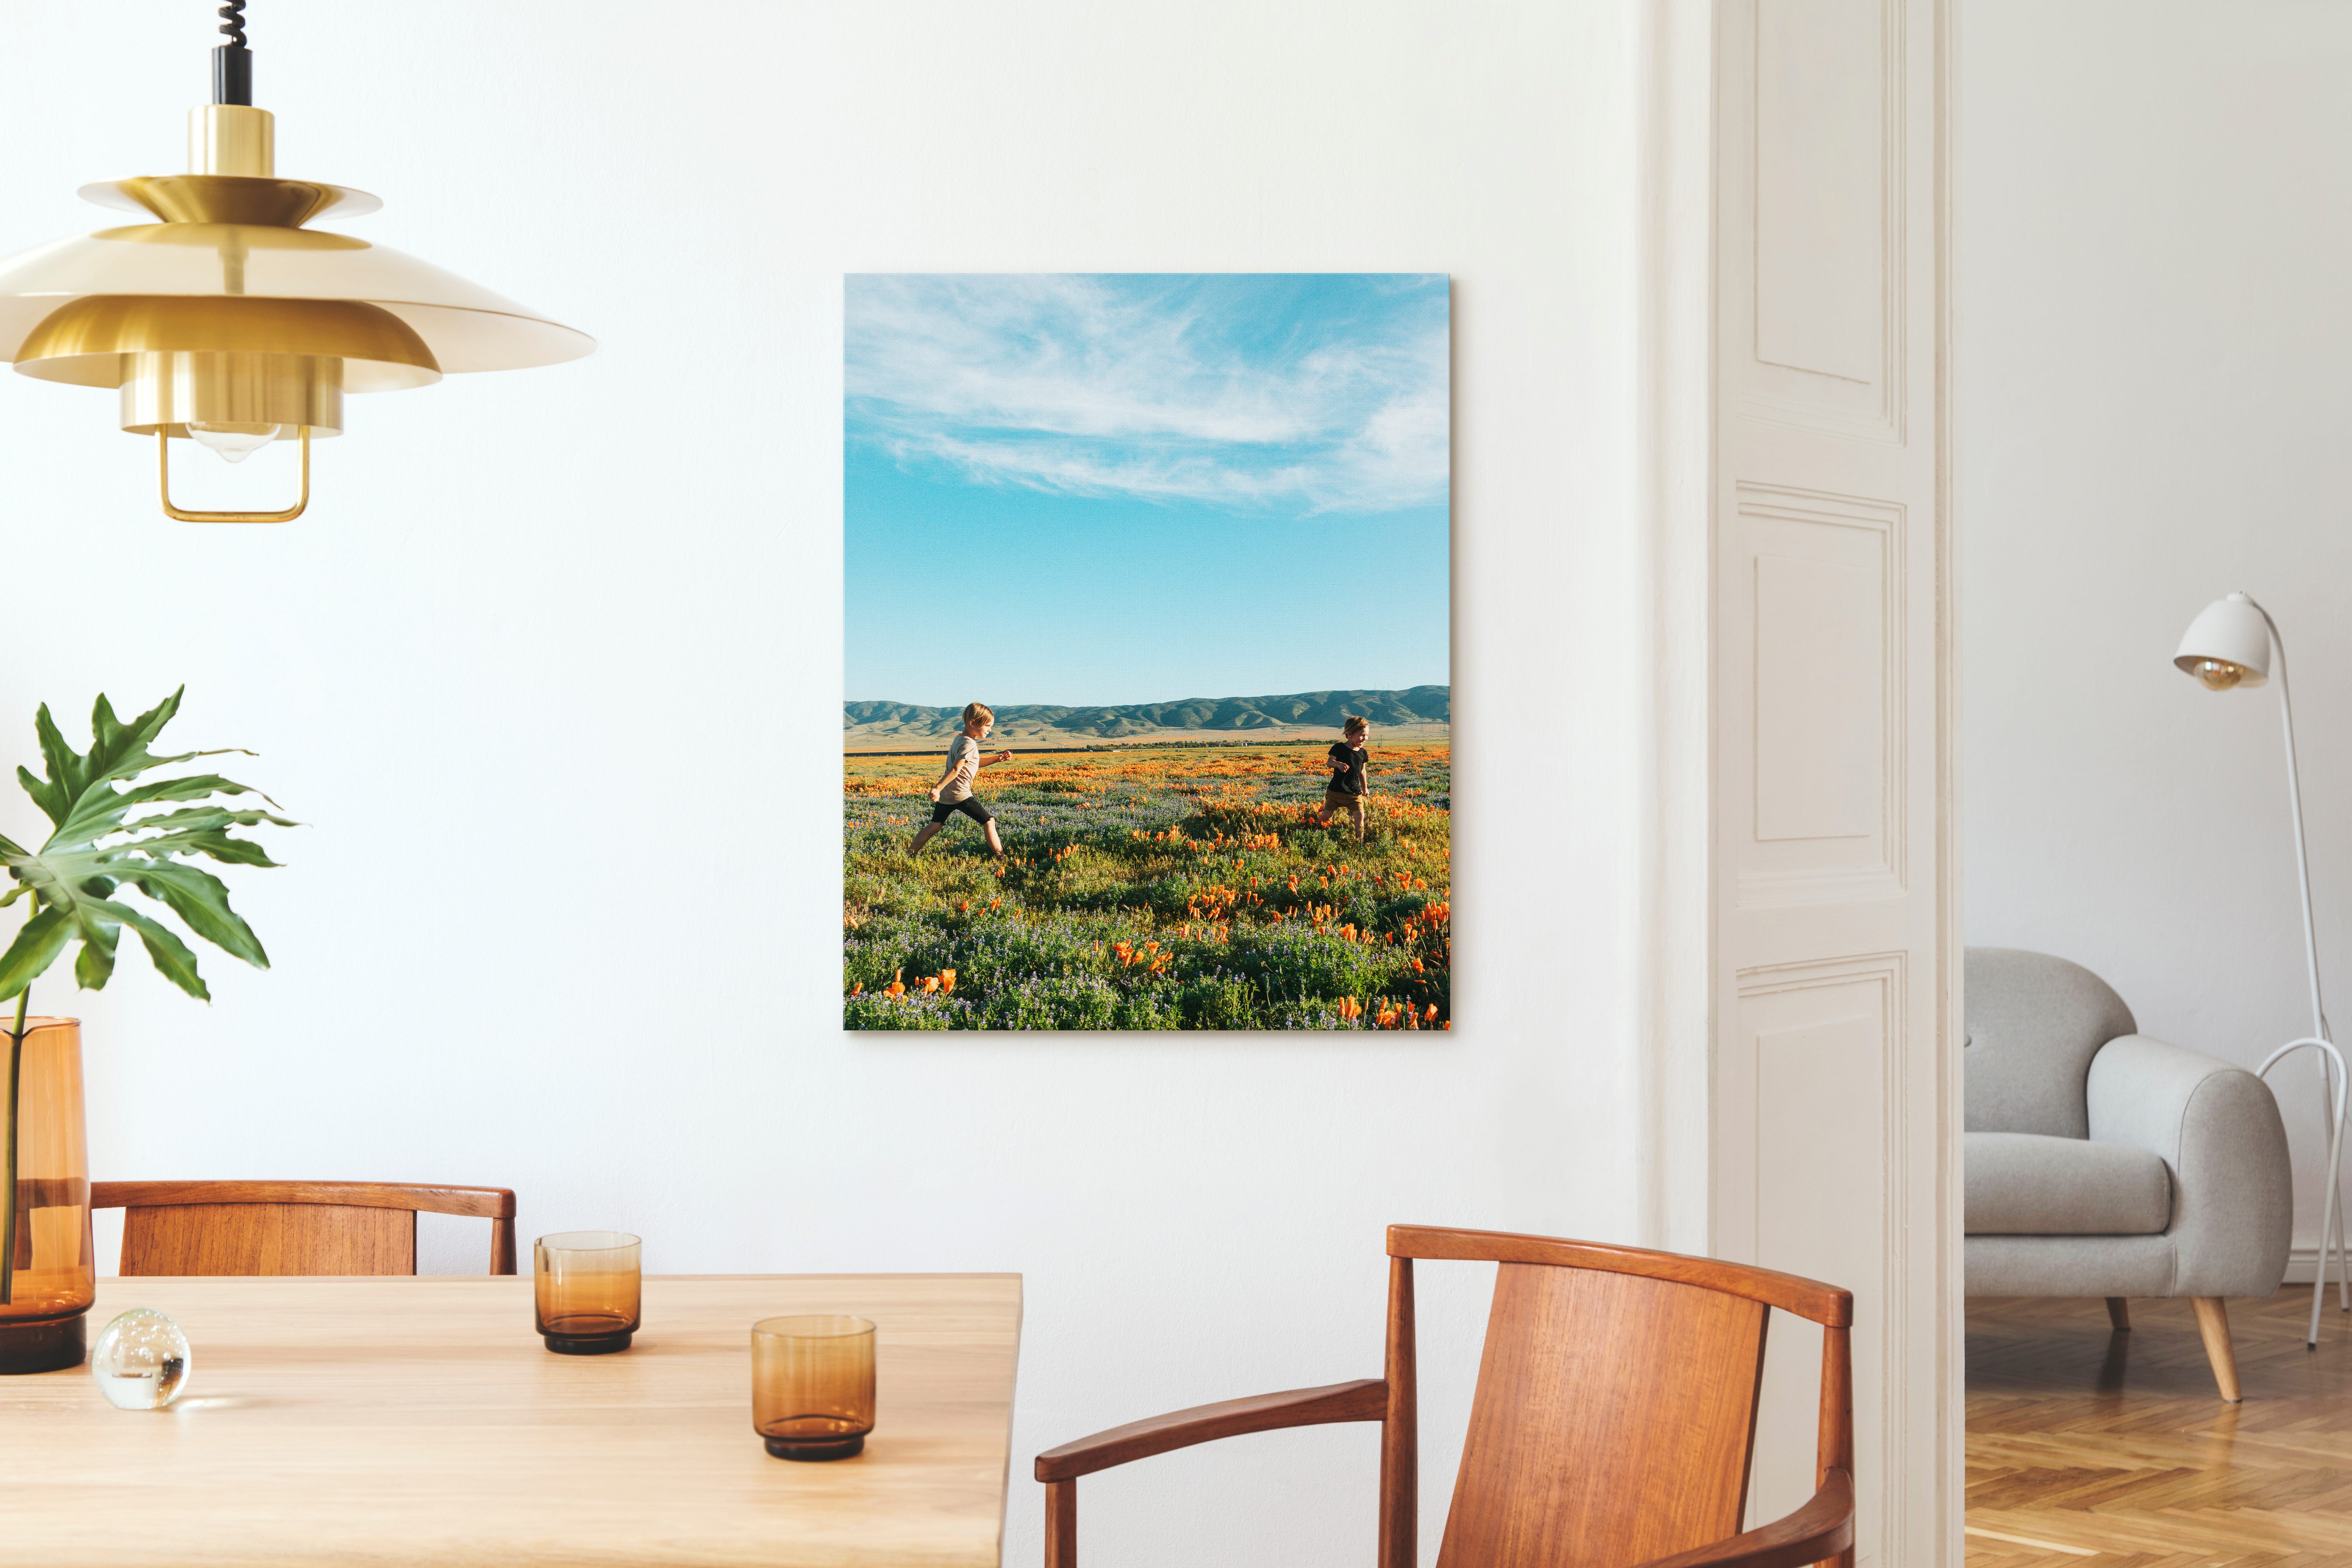 Canvas print in dining room of two children running through a field